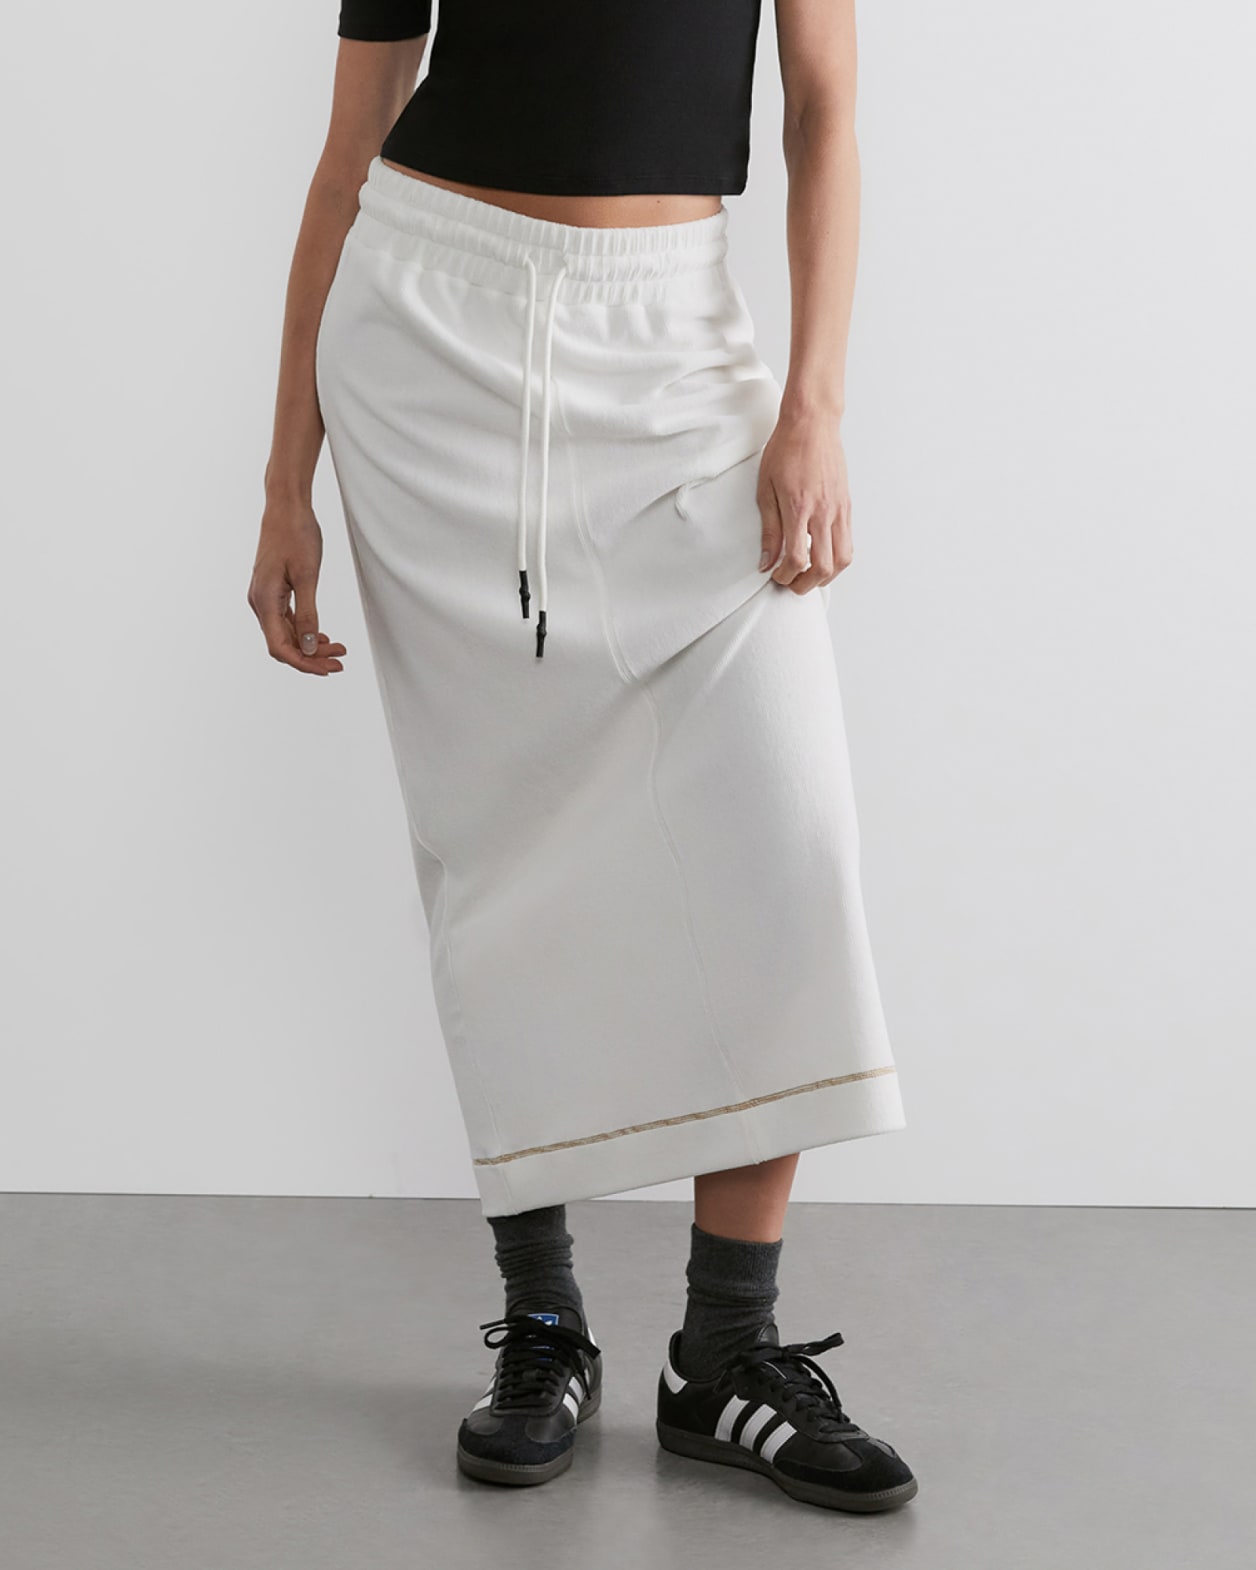 Alyse Cord Pull On Skirt in OFF WHITE